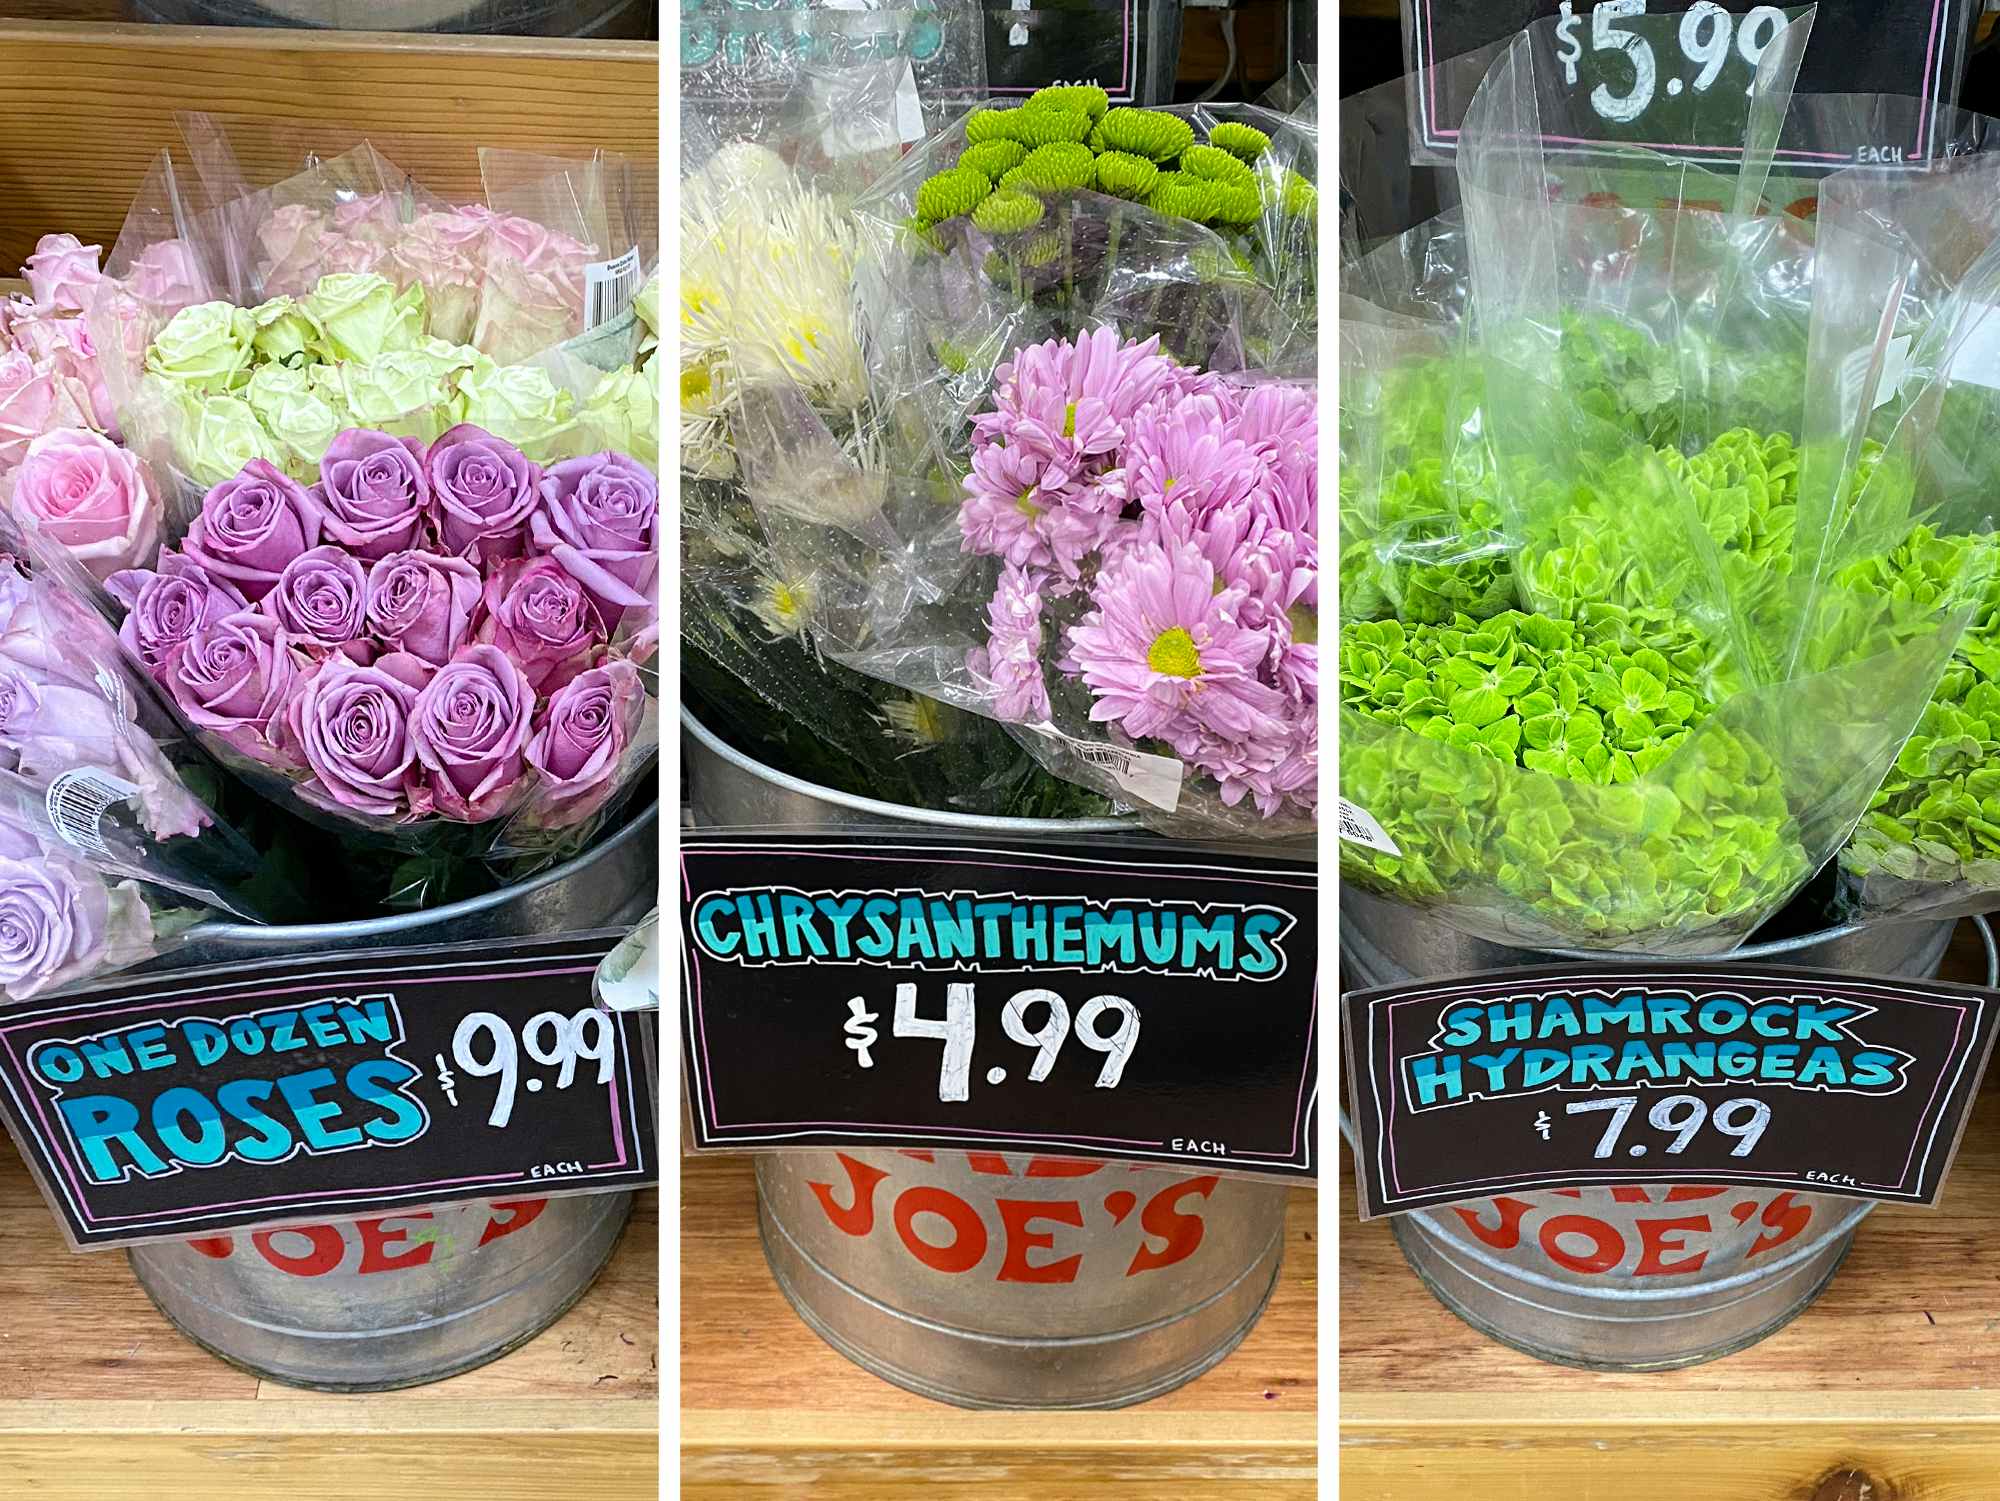 made 5 mini bouquets for mothers day. all of it for under $38. thank y, trader joe's bouquet